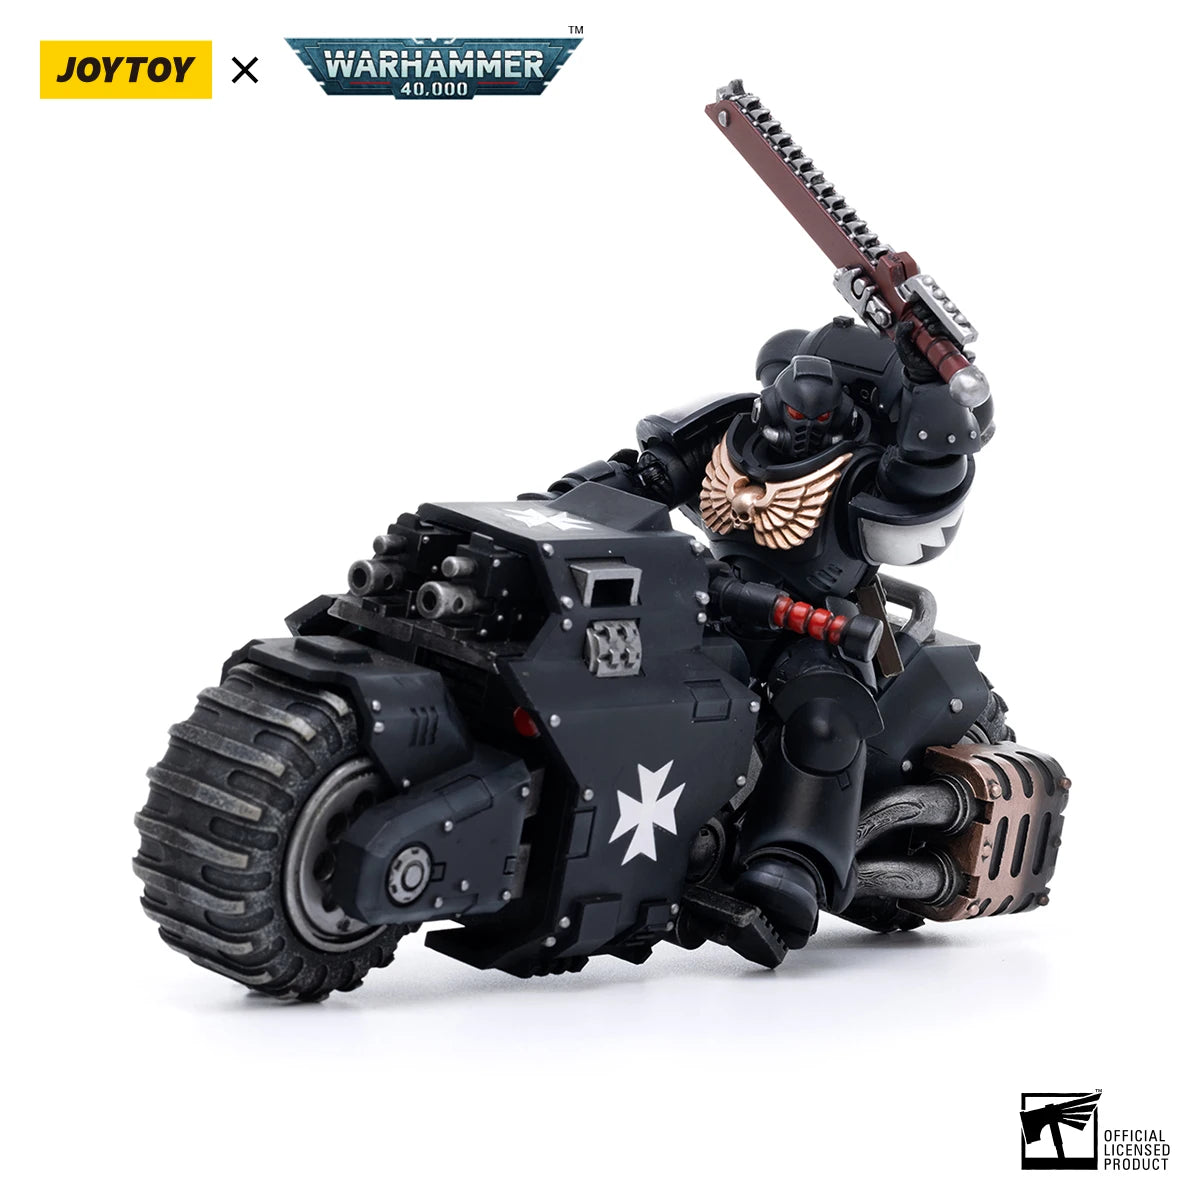 JOYTOY 1/18 Action Figure Warhammer 40K Black Templars Outriders Anime Collection Military Model